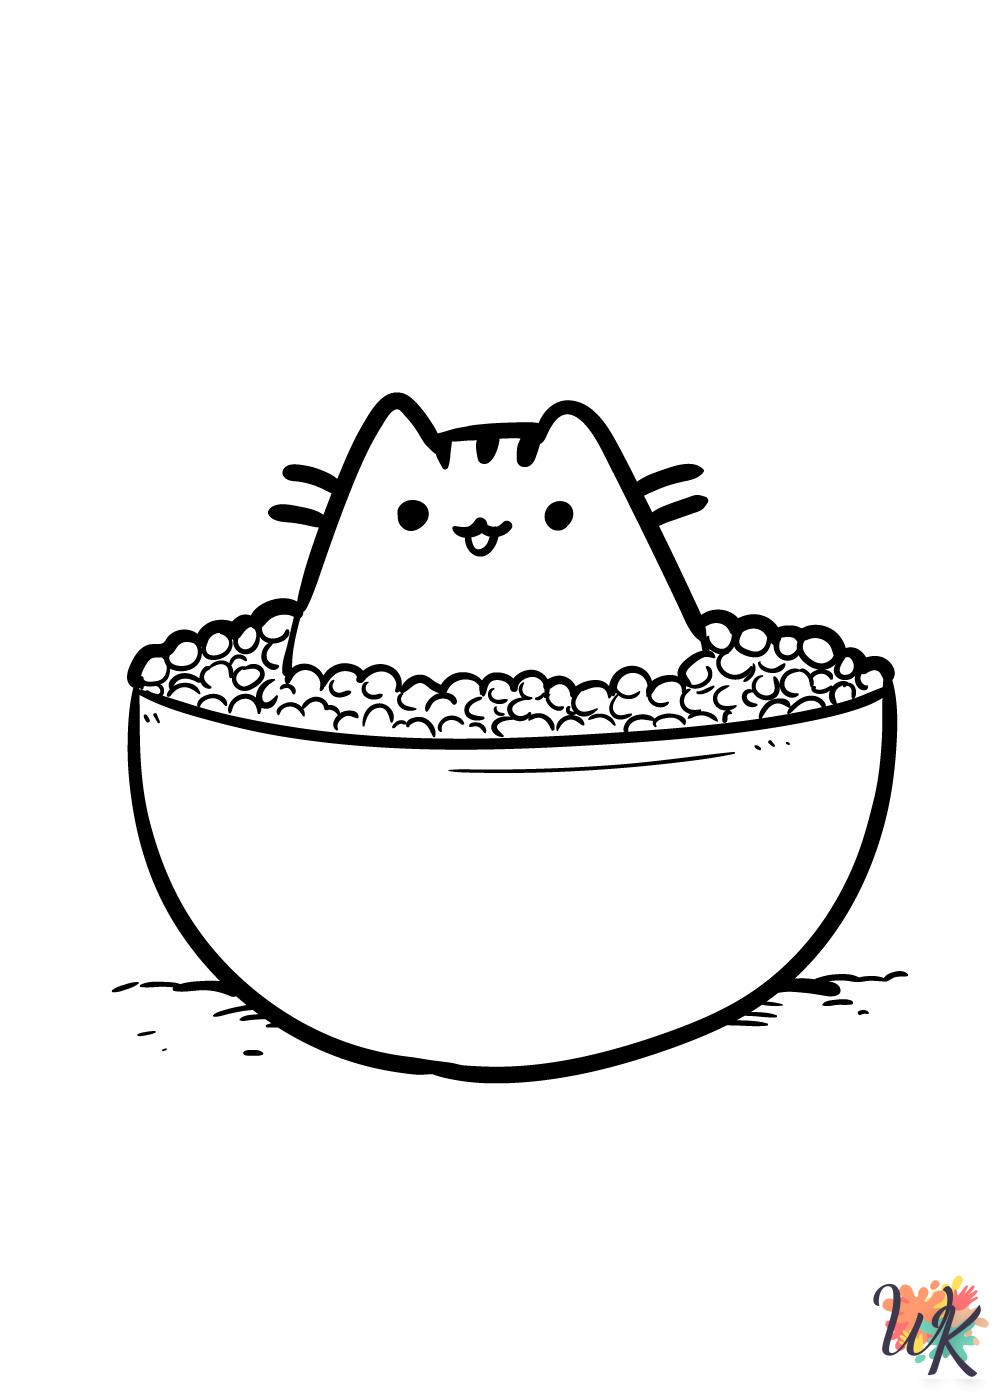 Pusheen coloring pages to print